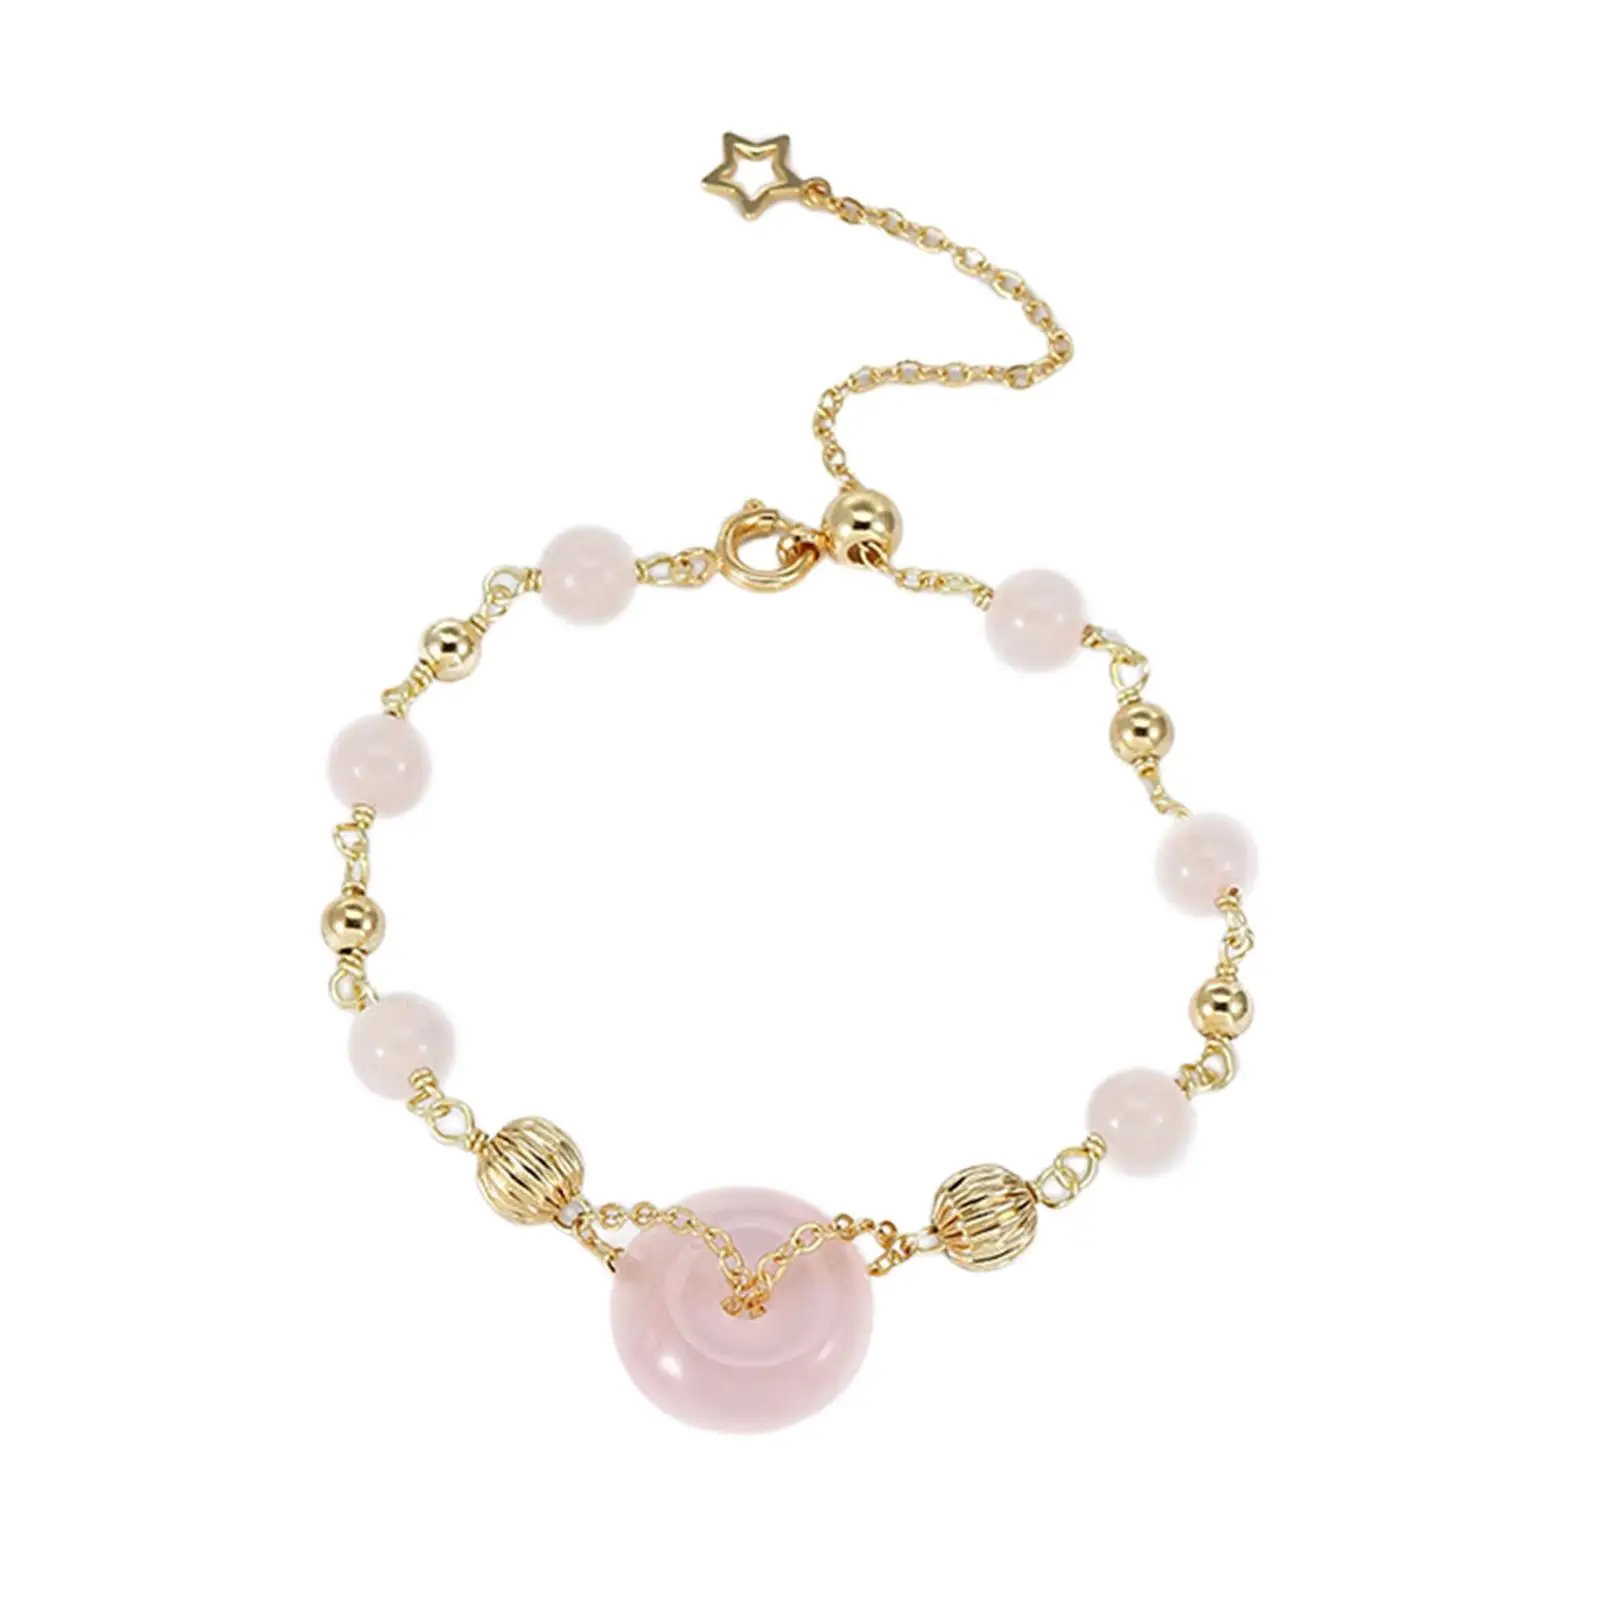 Classic Pink Beads Bracelet Charm Decorative Delicate for Different Ages